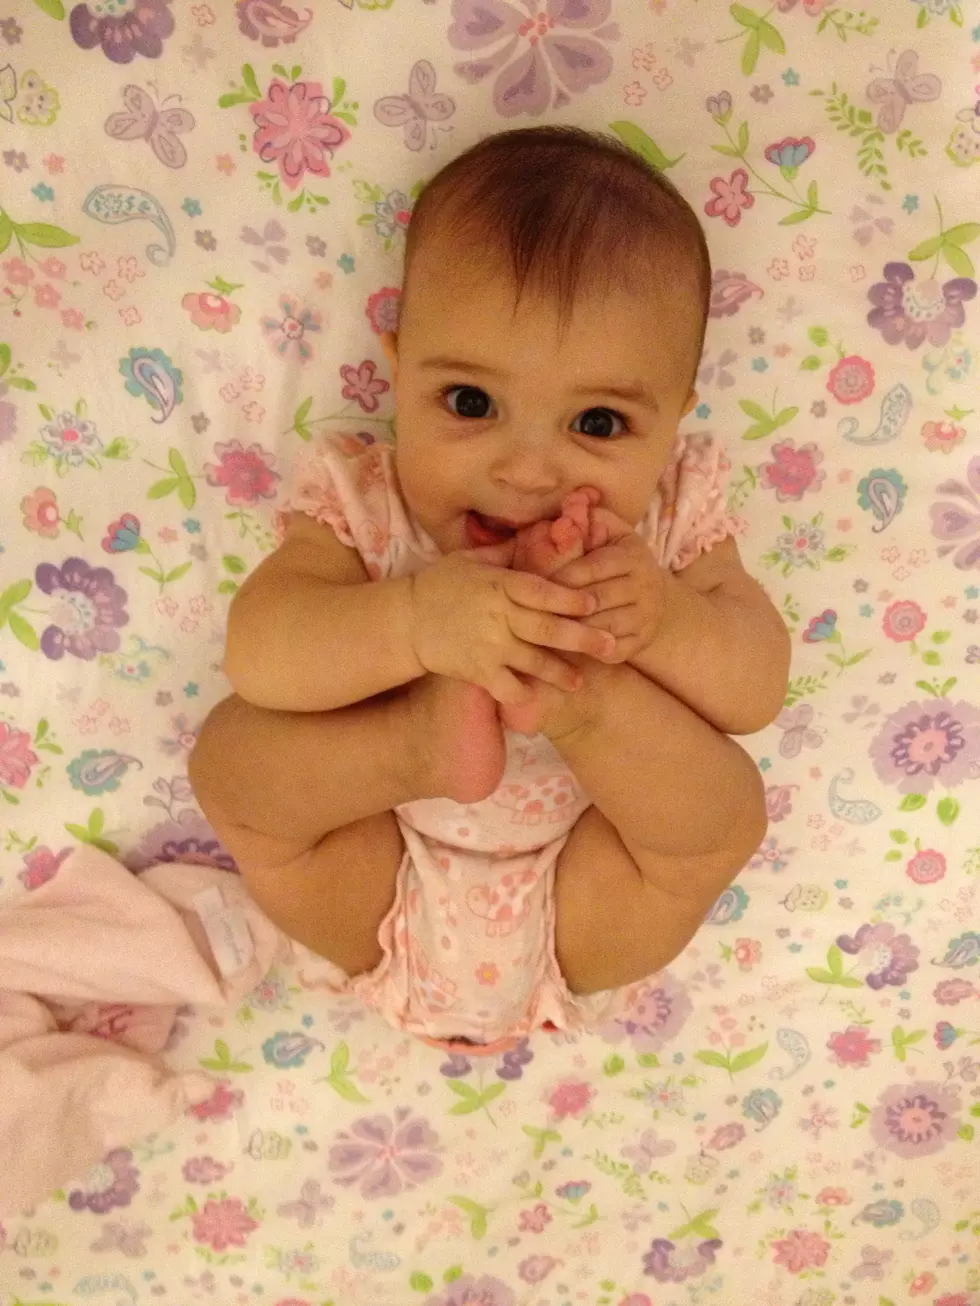 VOTE — Western New York’s Cutest Baby, Group 6 [POLL]